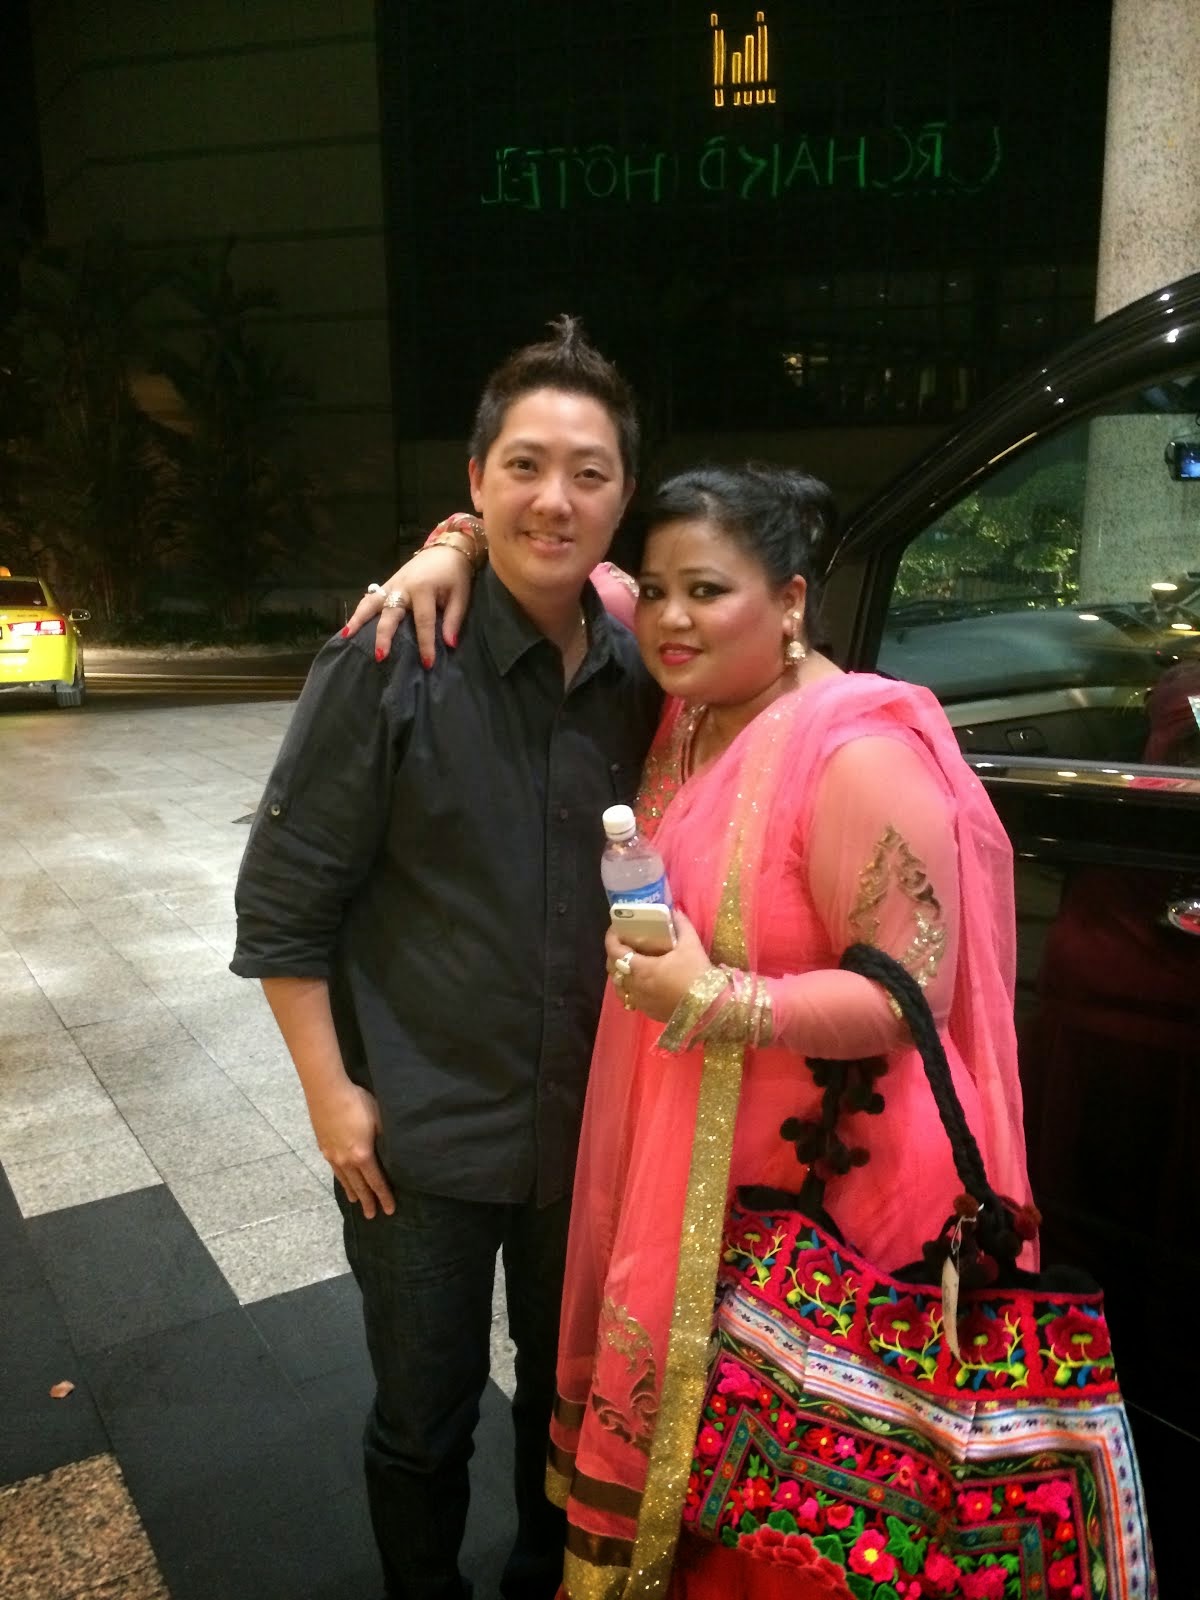 Bharti Singh From India @ RWS Event 17 August 2014